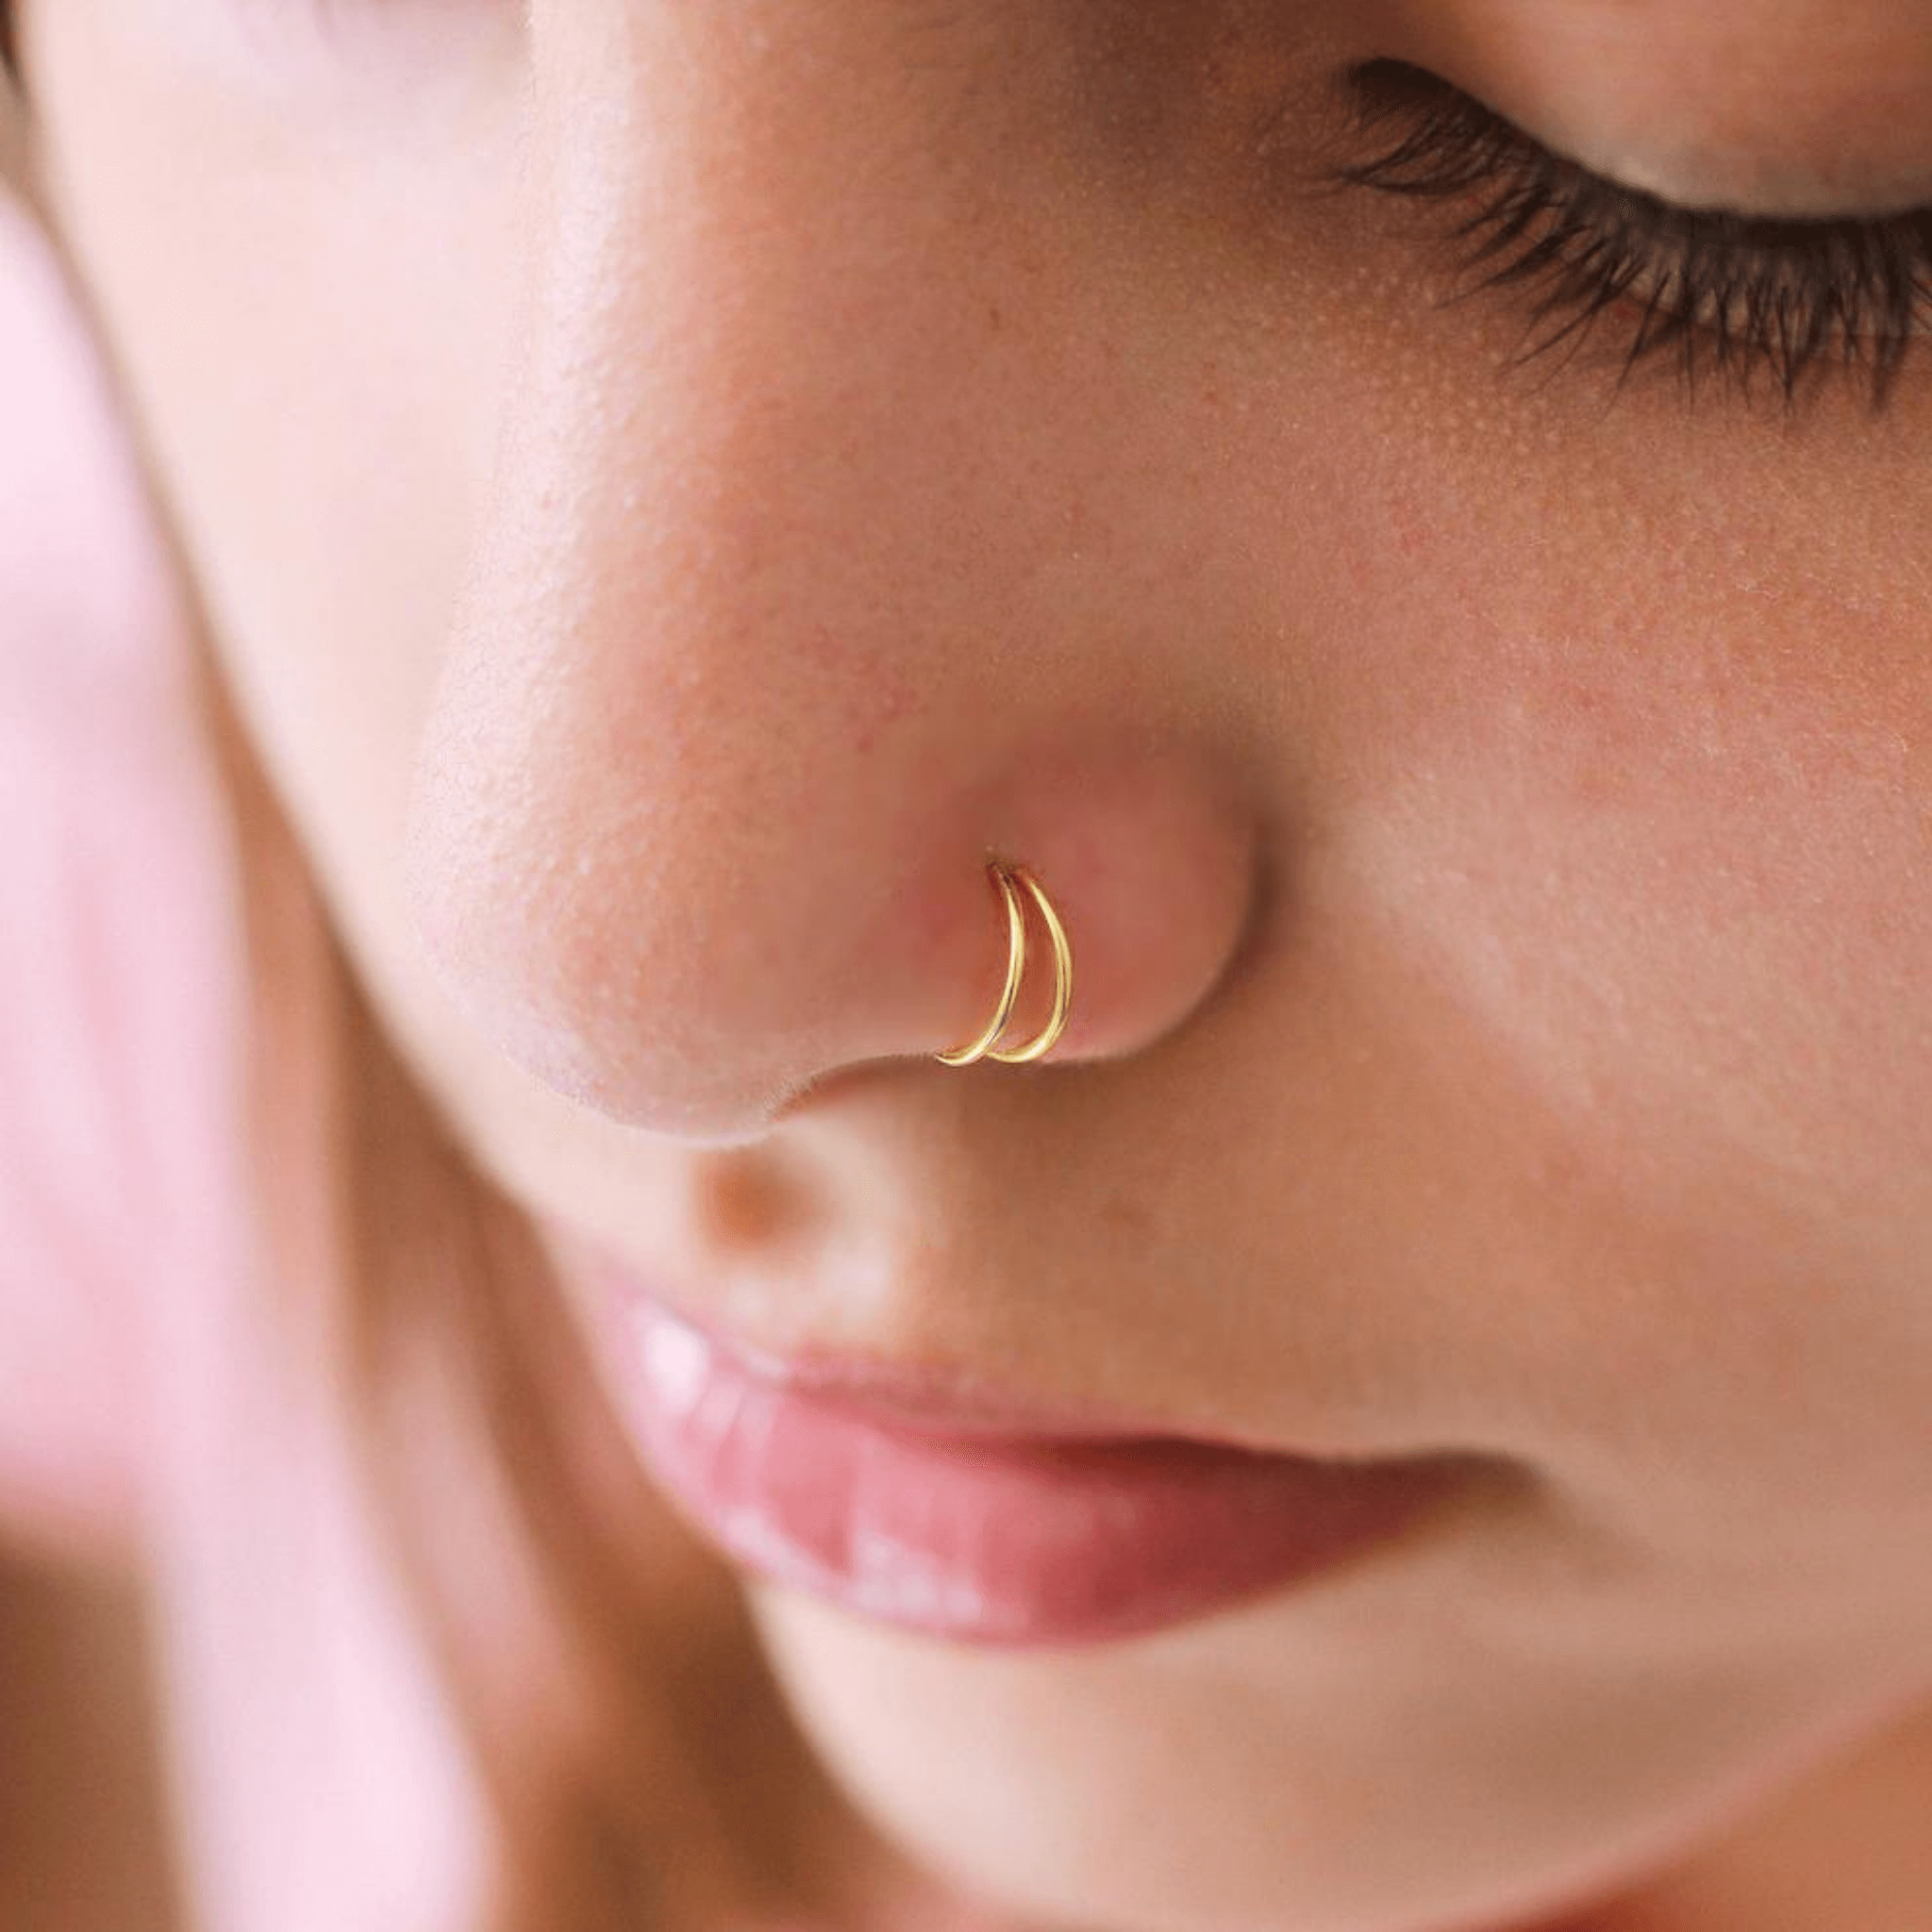 Black Metal oxidised Gold nose ring without piercing Press On Combo Pack of  Golden Oxidized Nose Pin Stud Ring Small Size